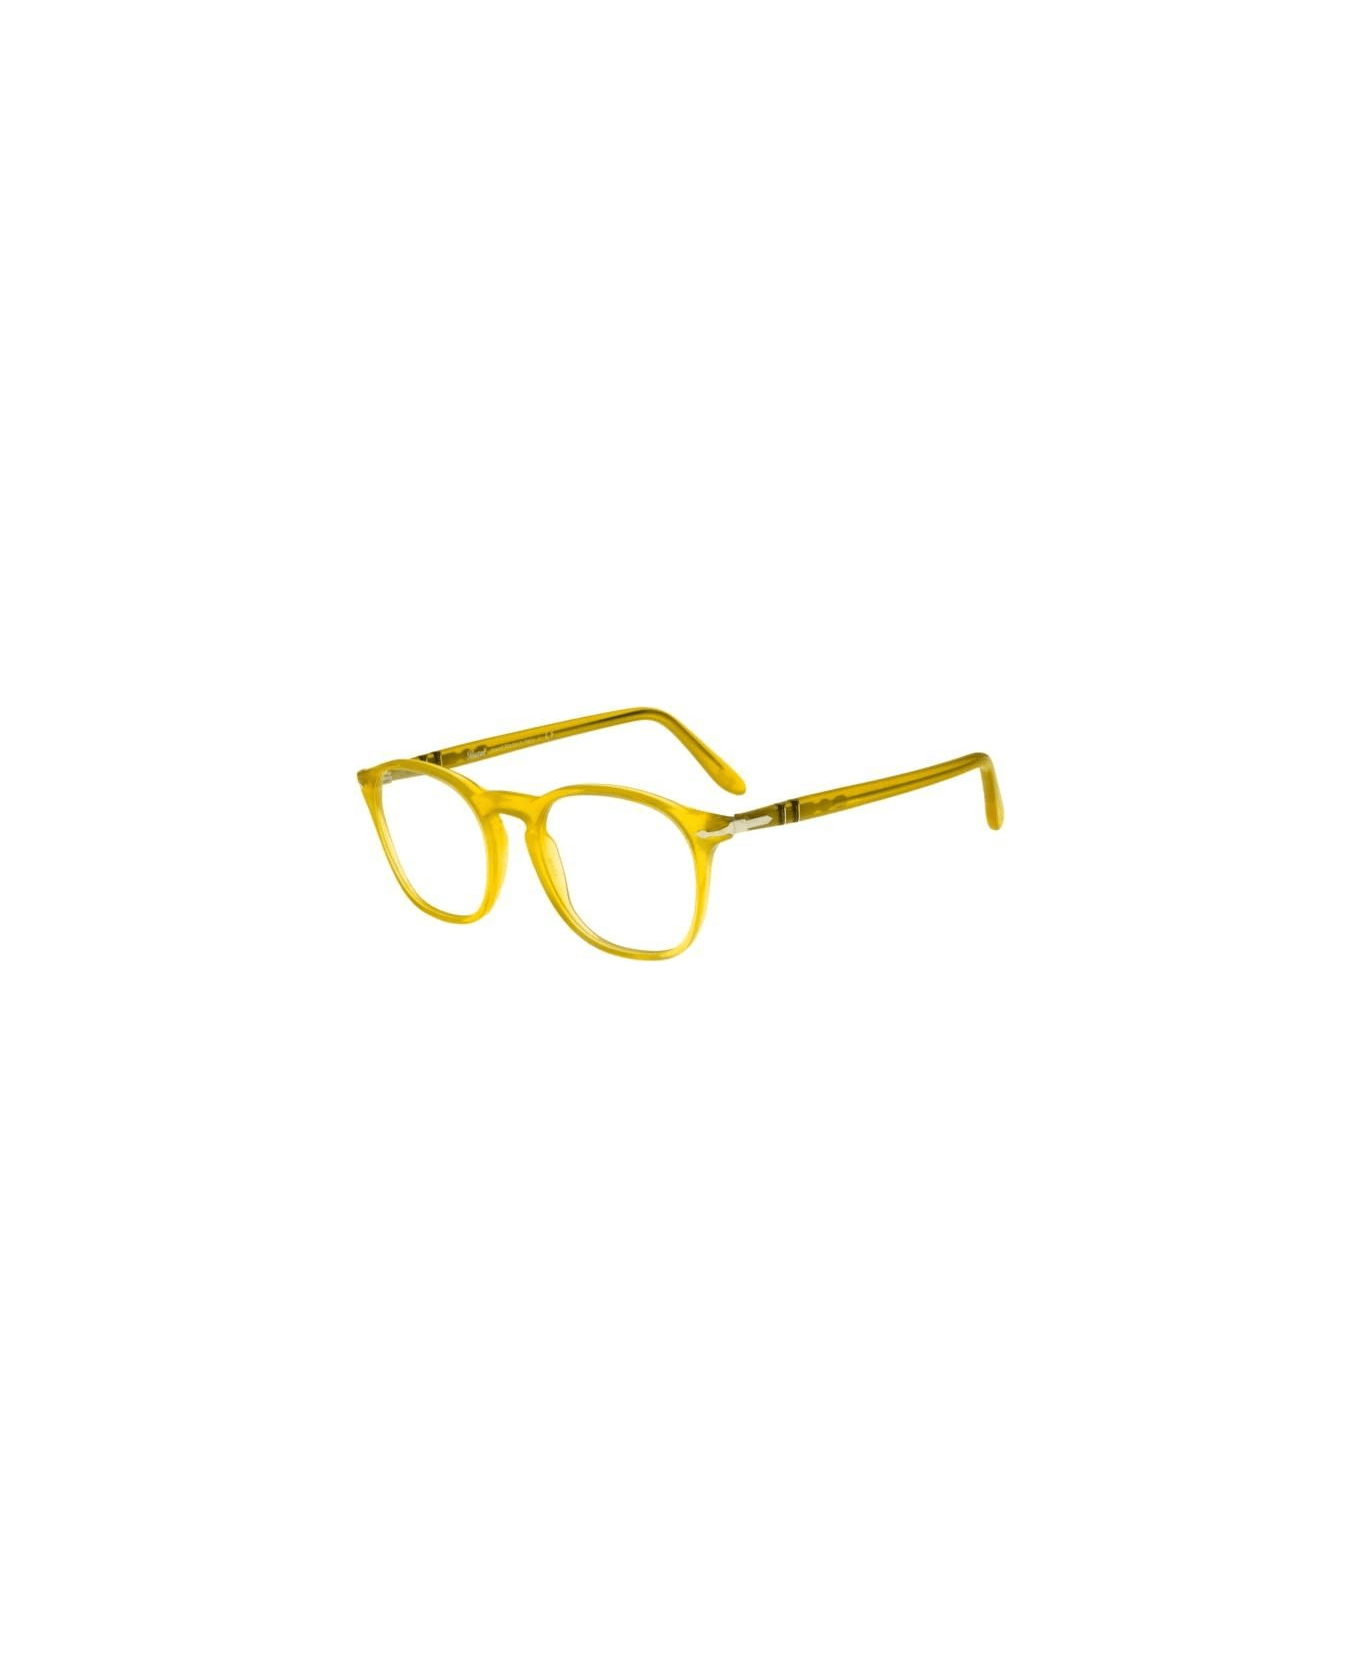 Persol Po3007v Miele Limited Edition Glasses - Giallo アイウェア